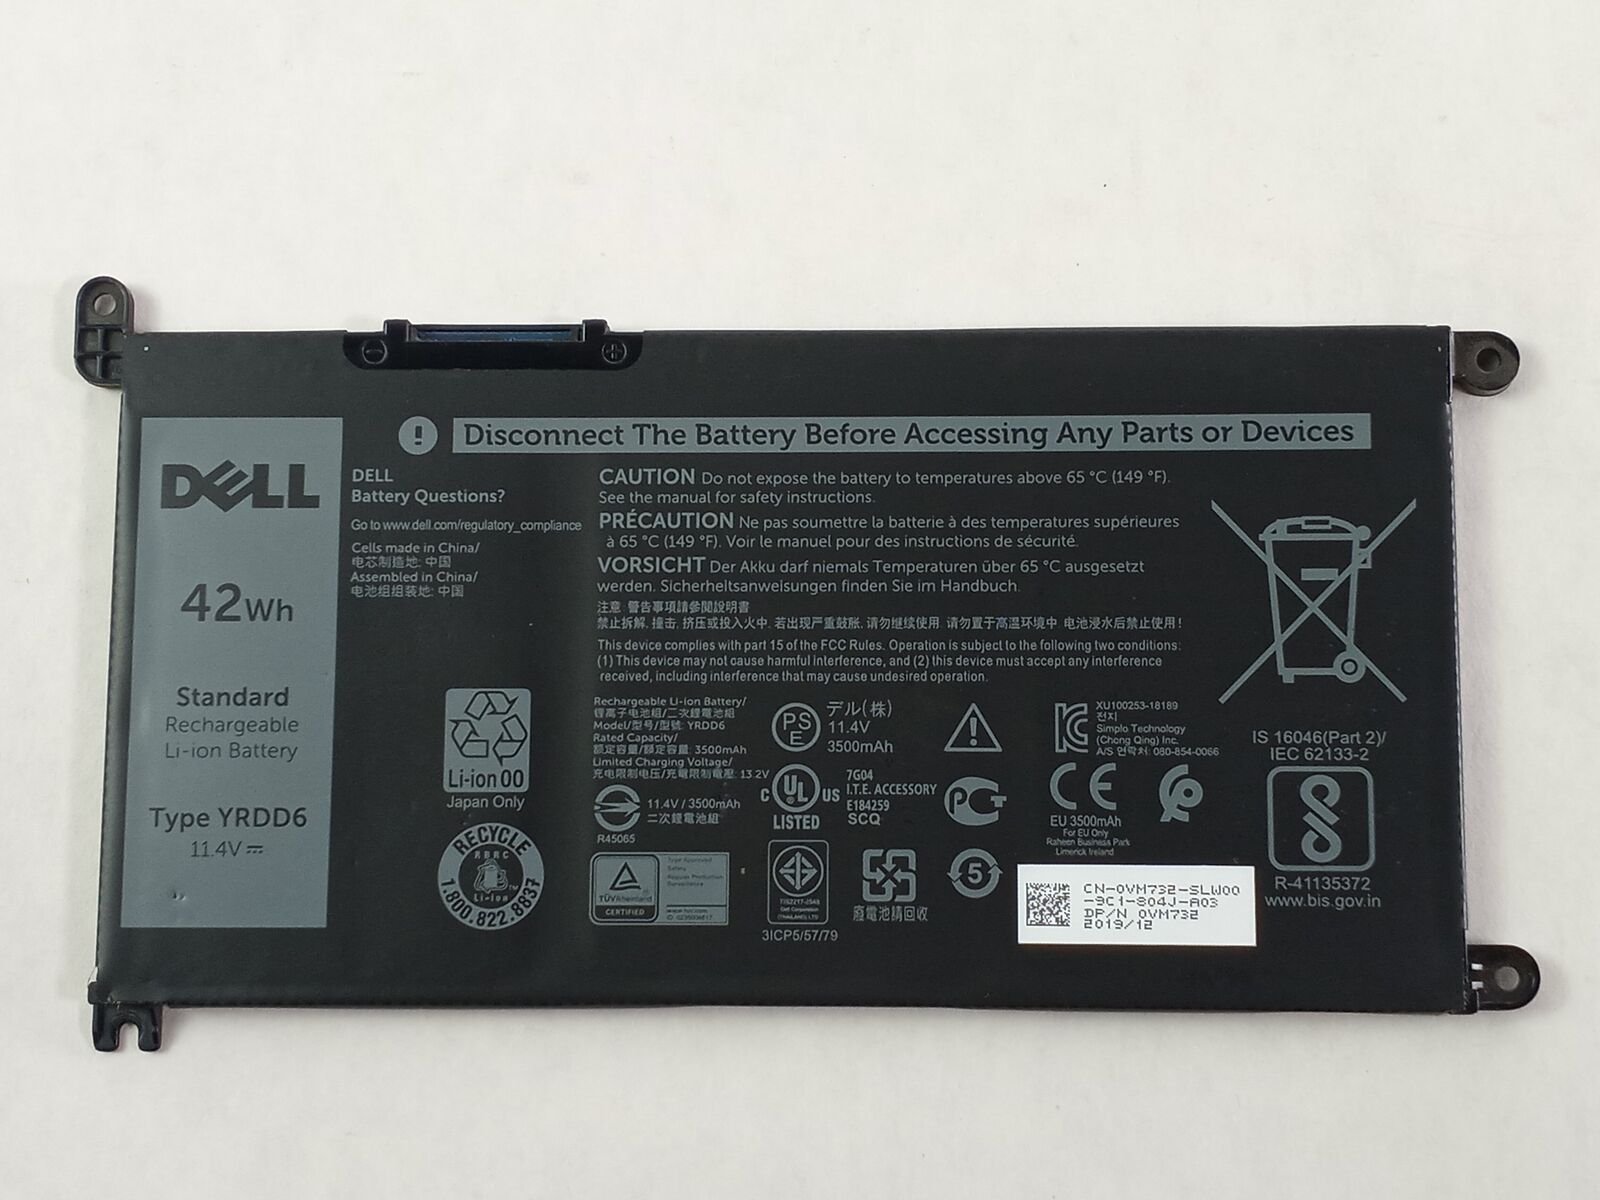 Lot of 10 Dell YRDD6 42Wh 3 Cell Laptop Battery for Latitude 3310 / Inspiron 14